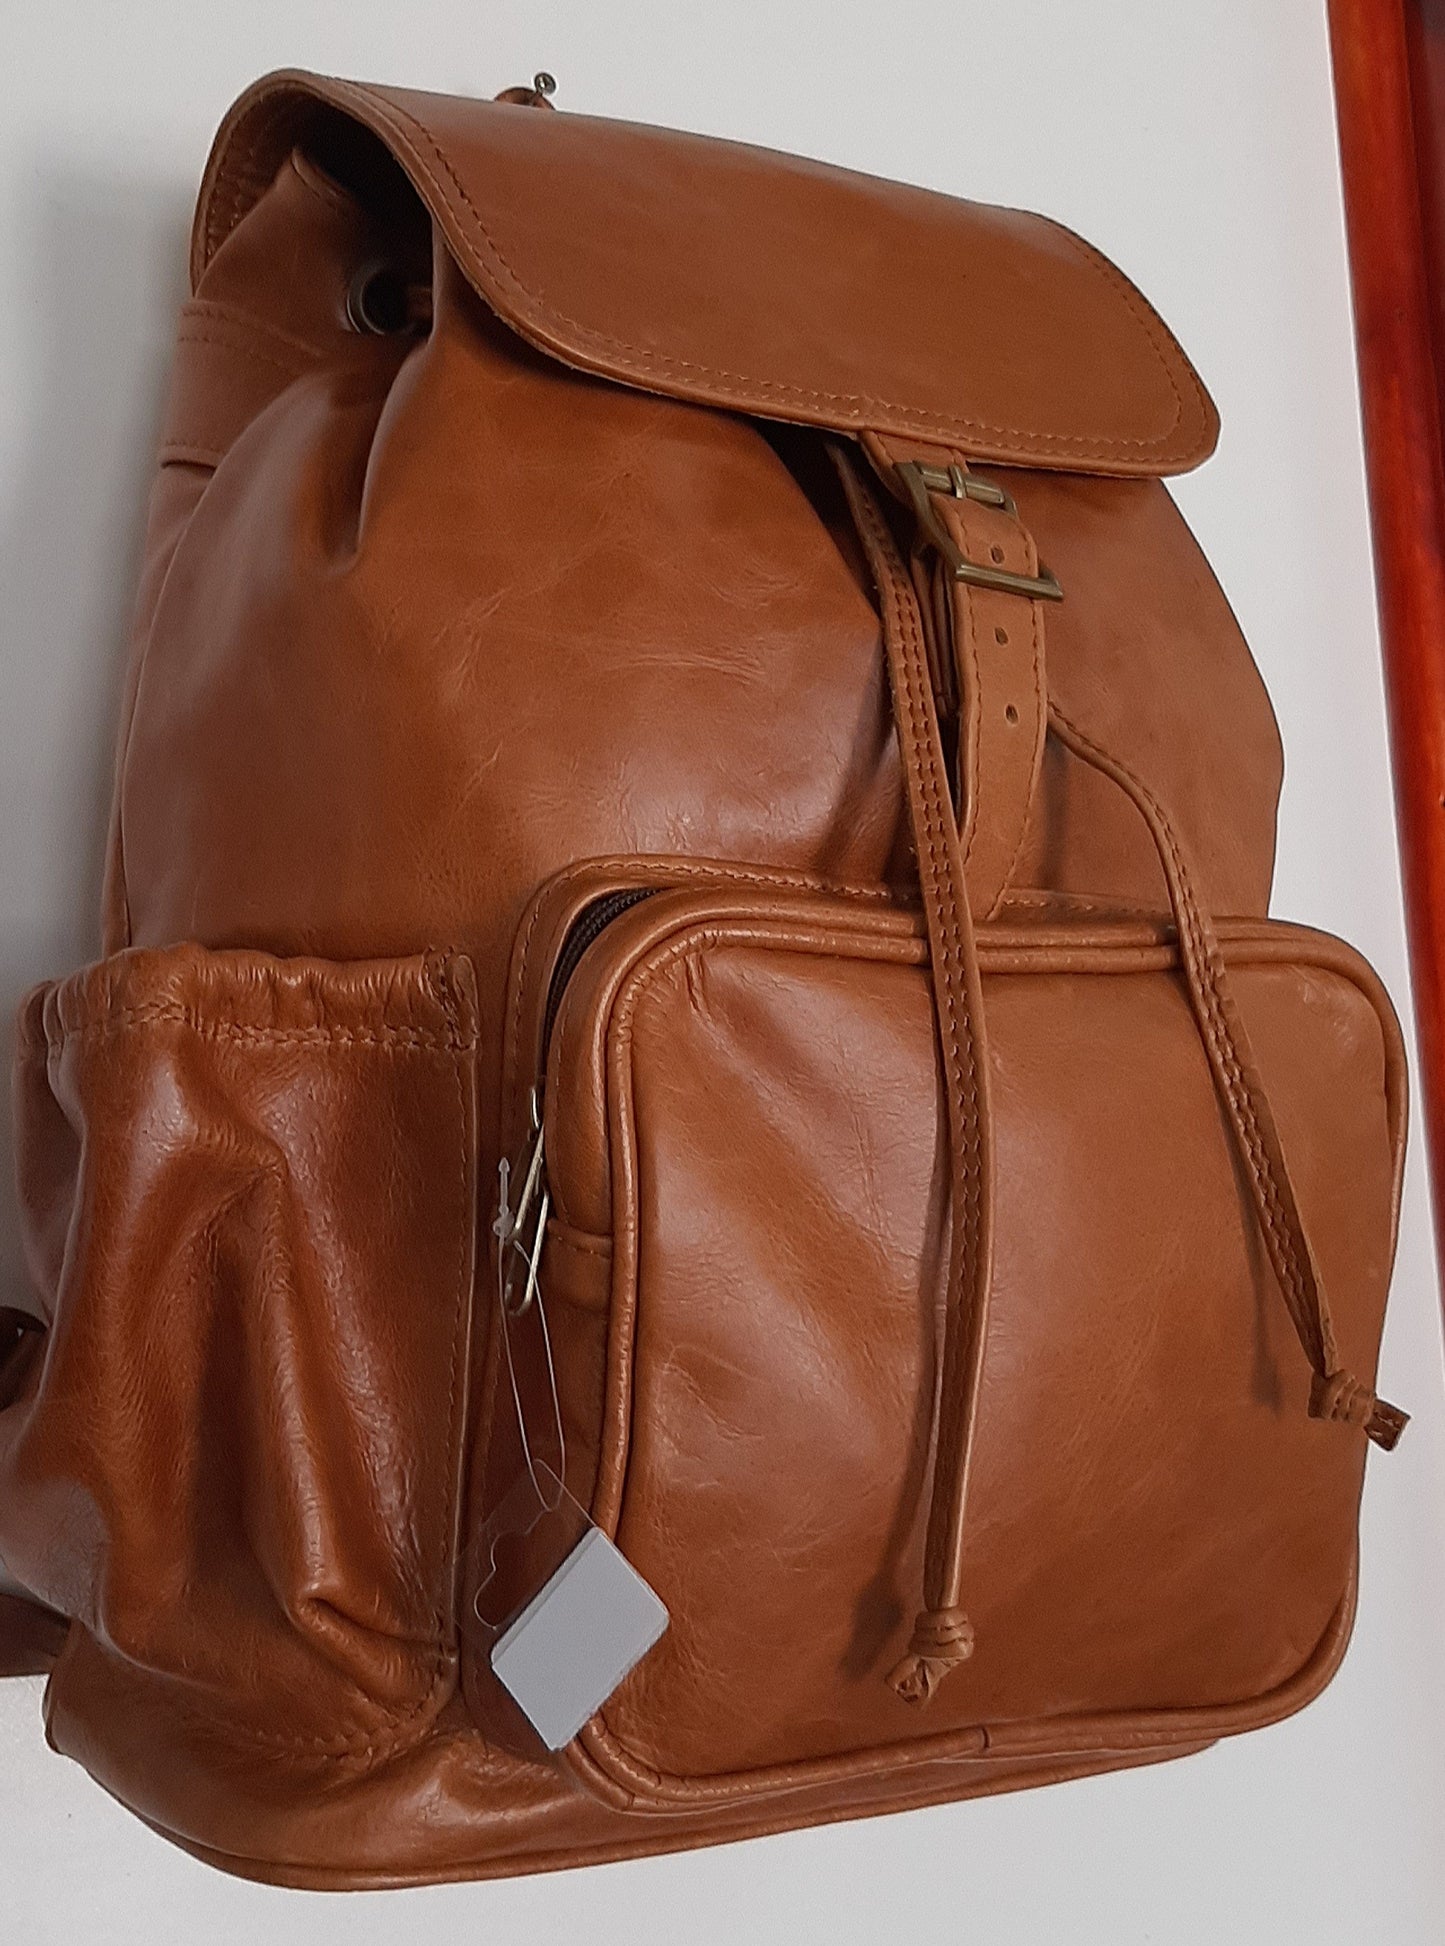 Backpacks with flap XL in light tan colour- cape Masai leather 